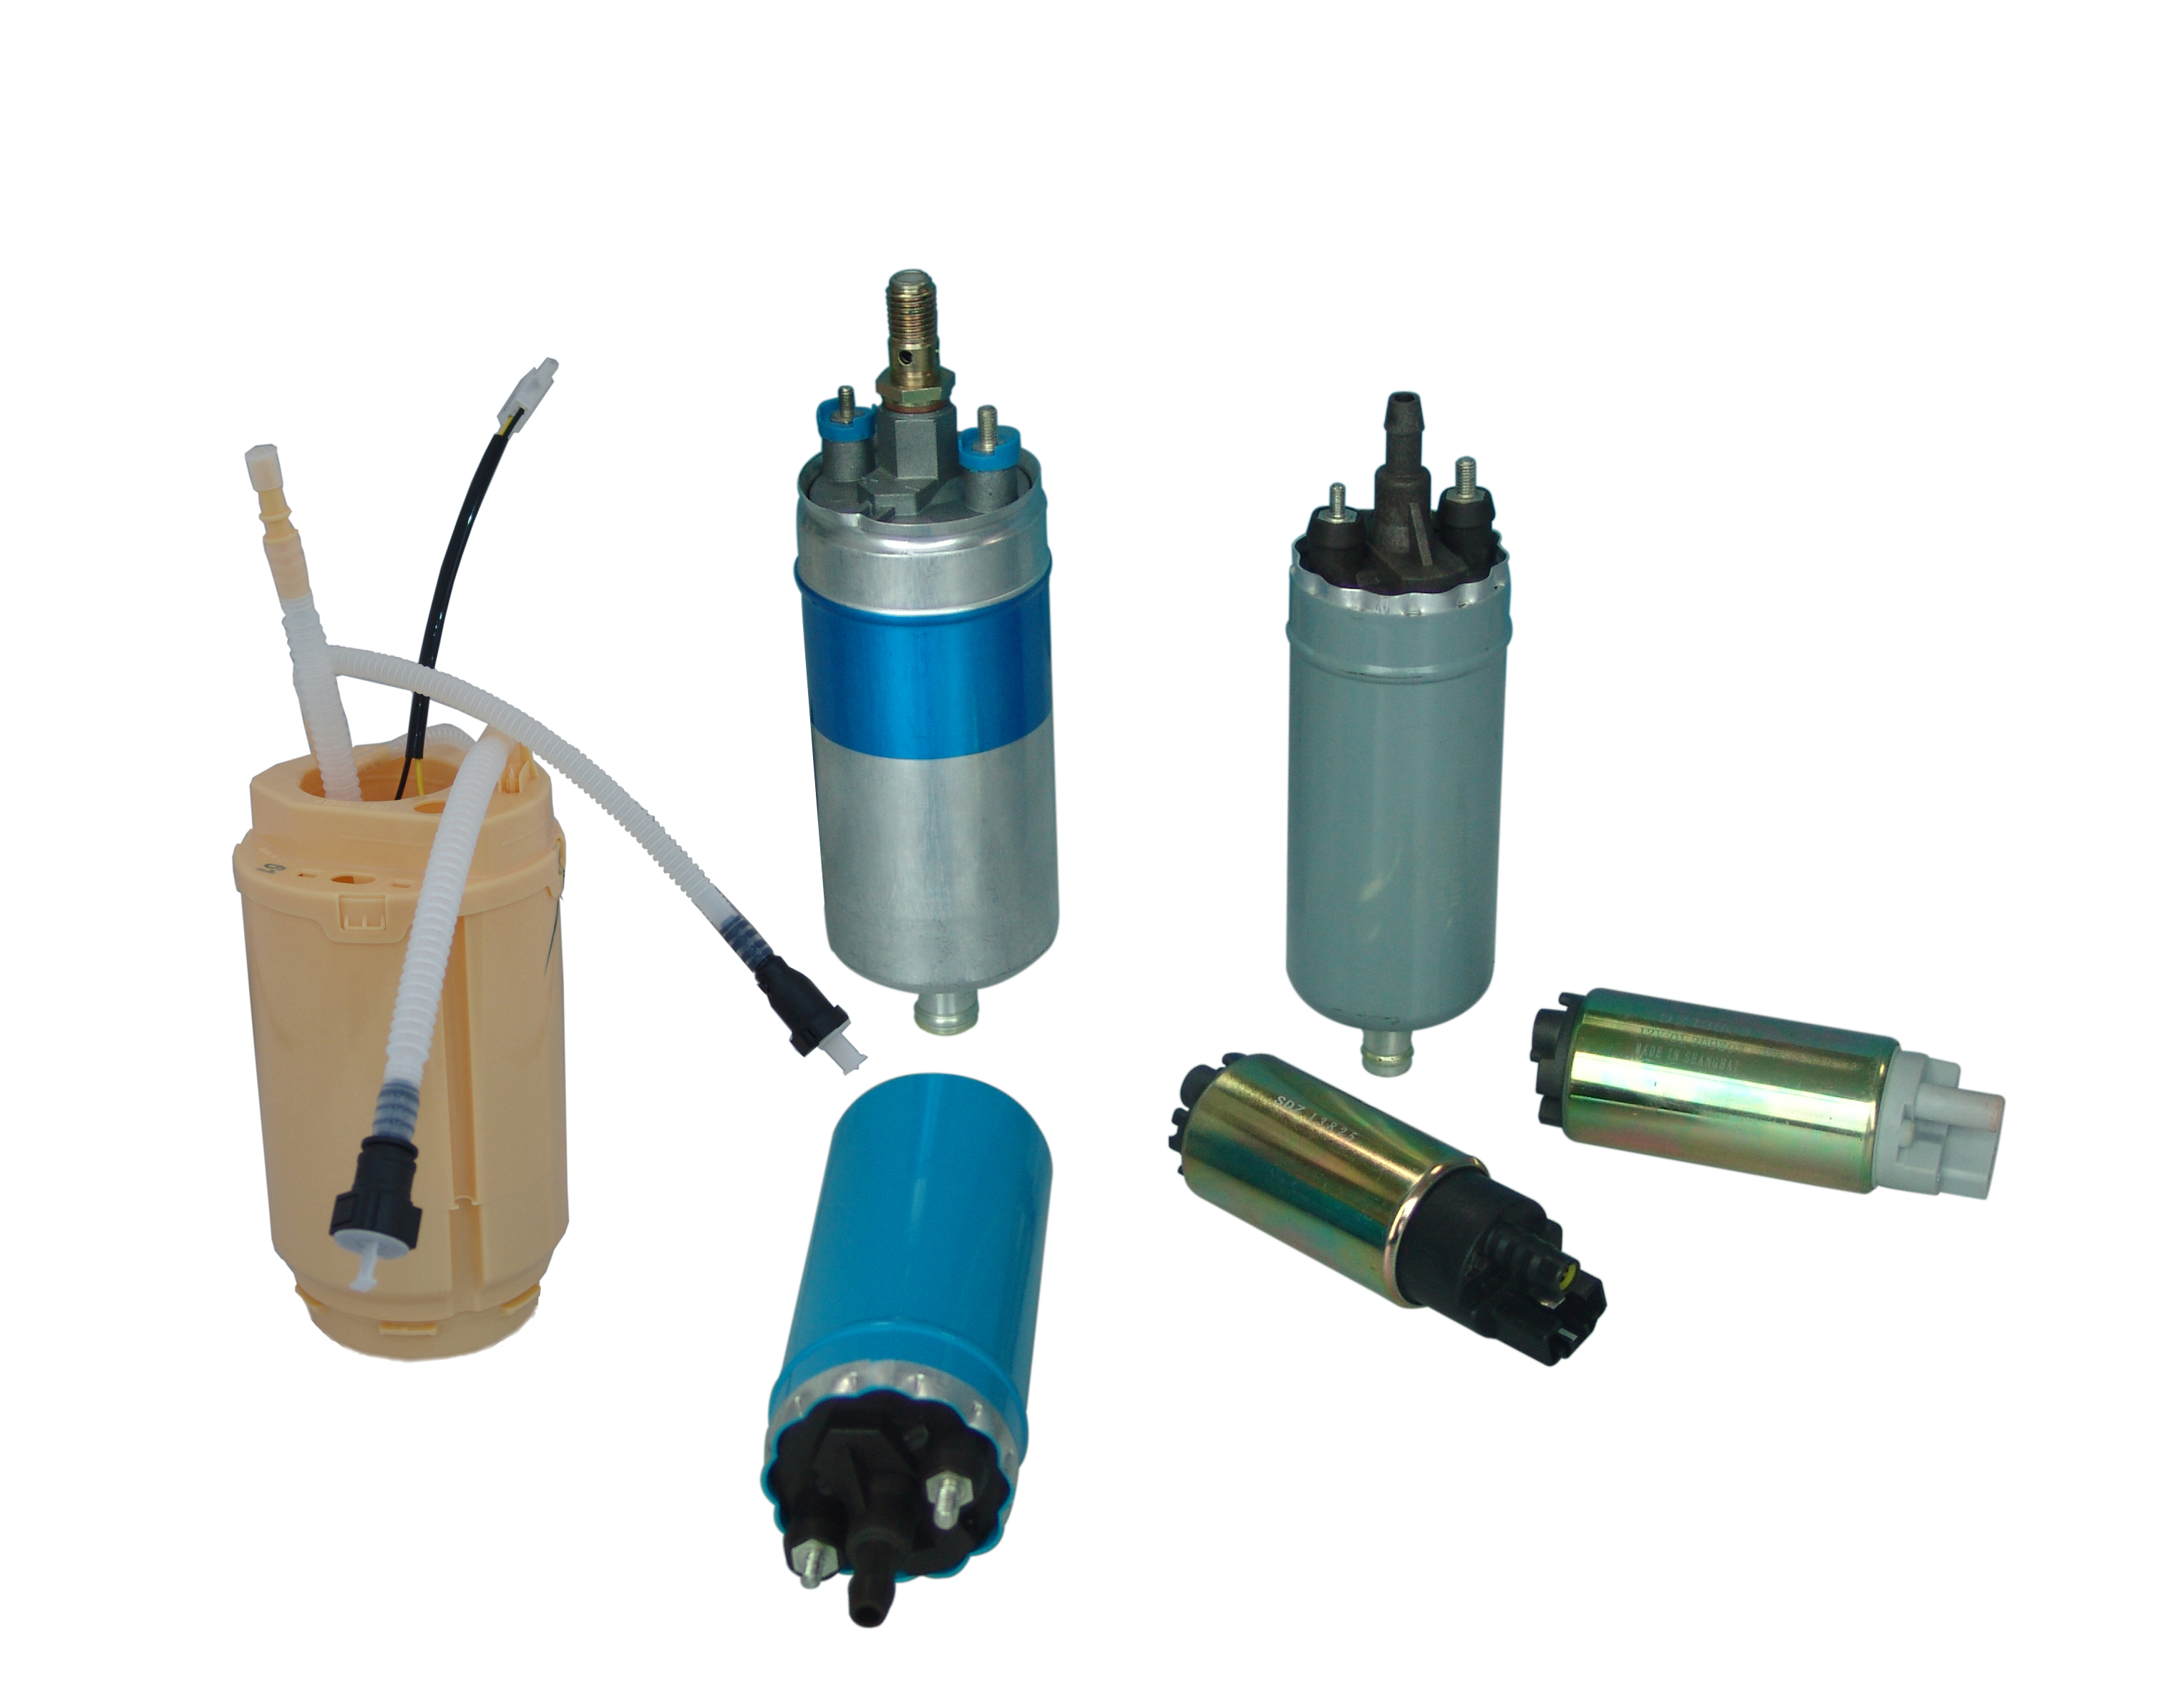 SDZ supplies various types of electric fuel pumps and modules.